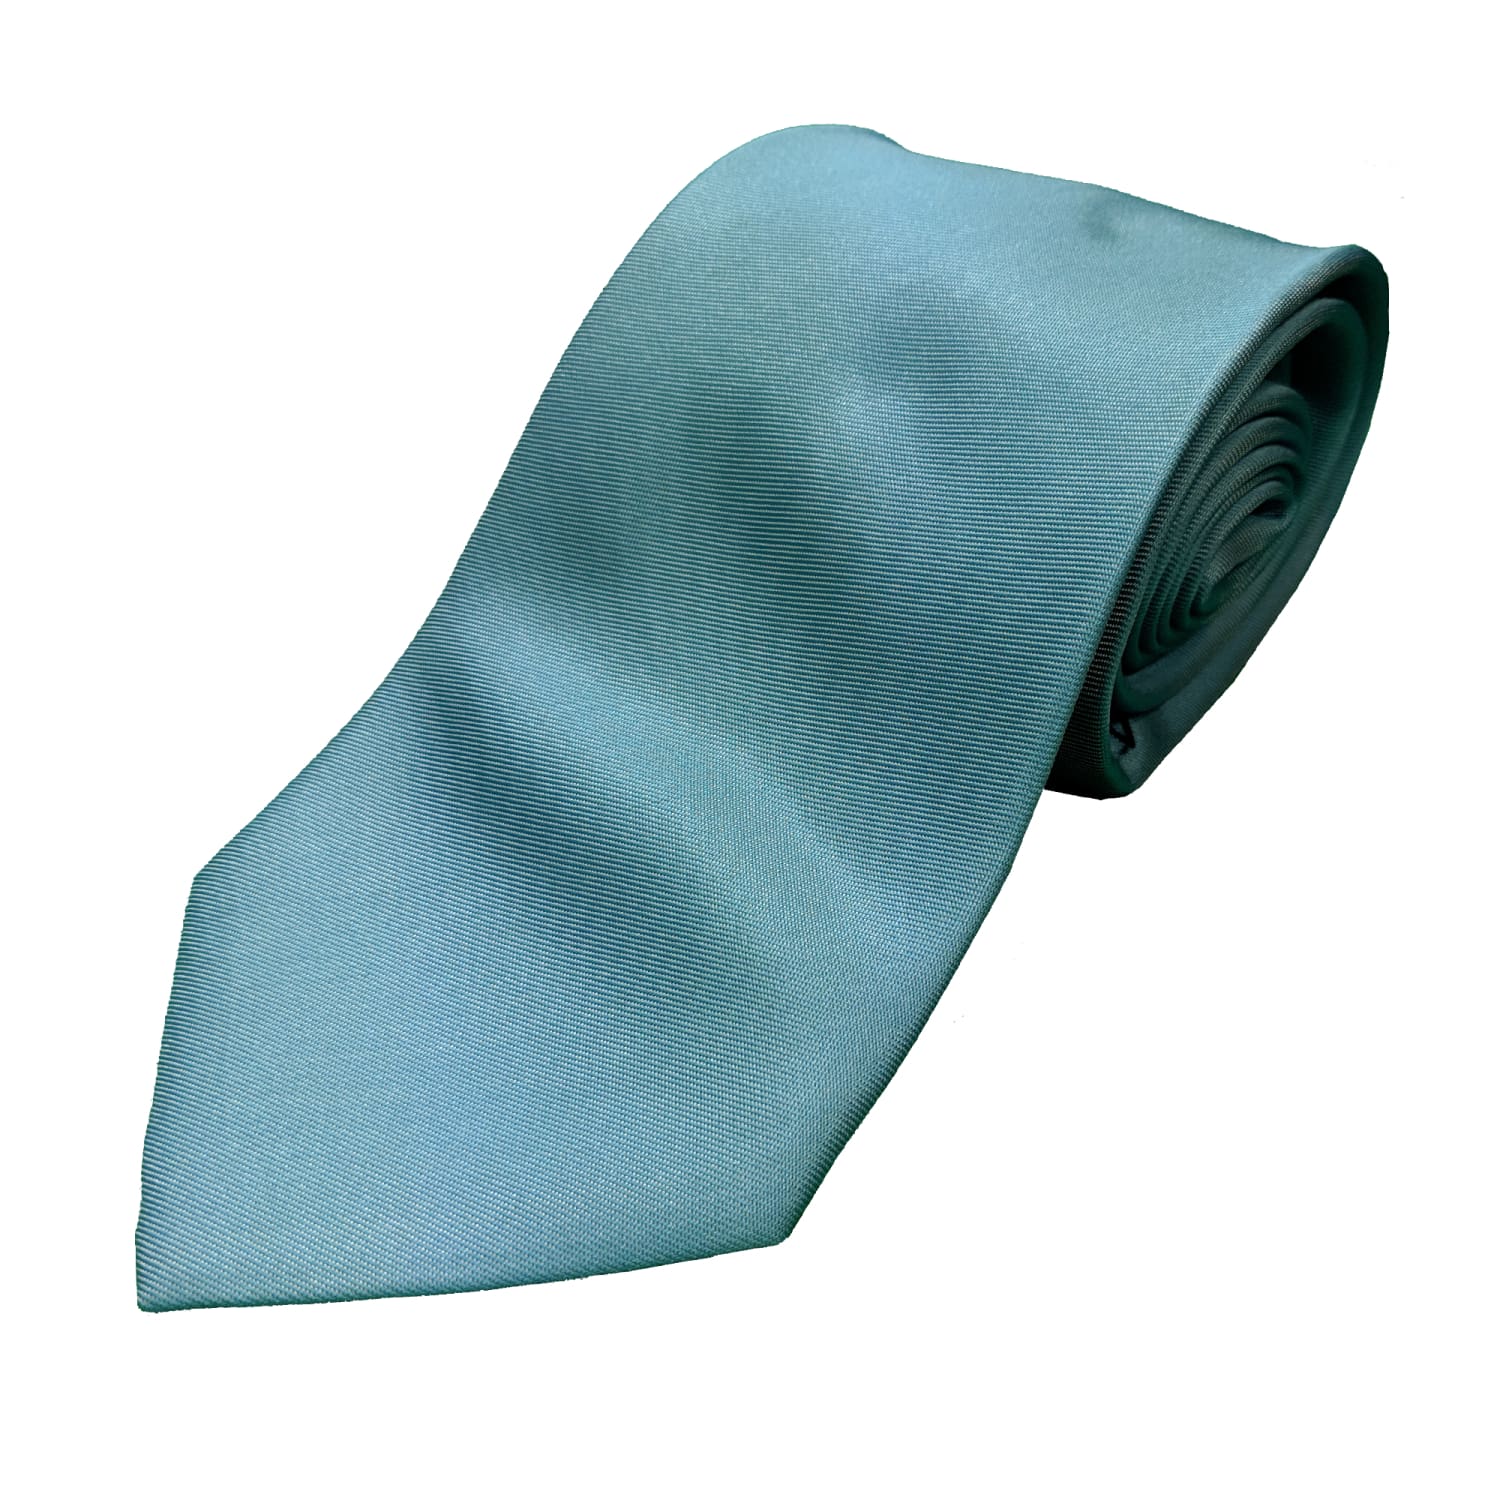 Double Two Tie - WP019 - Teal 1